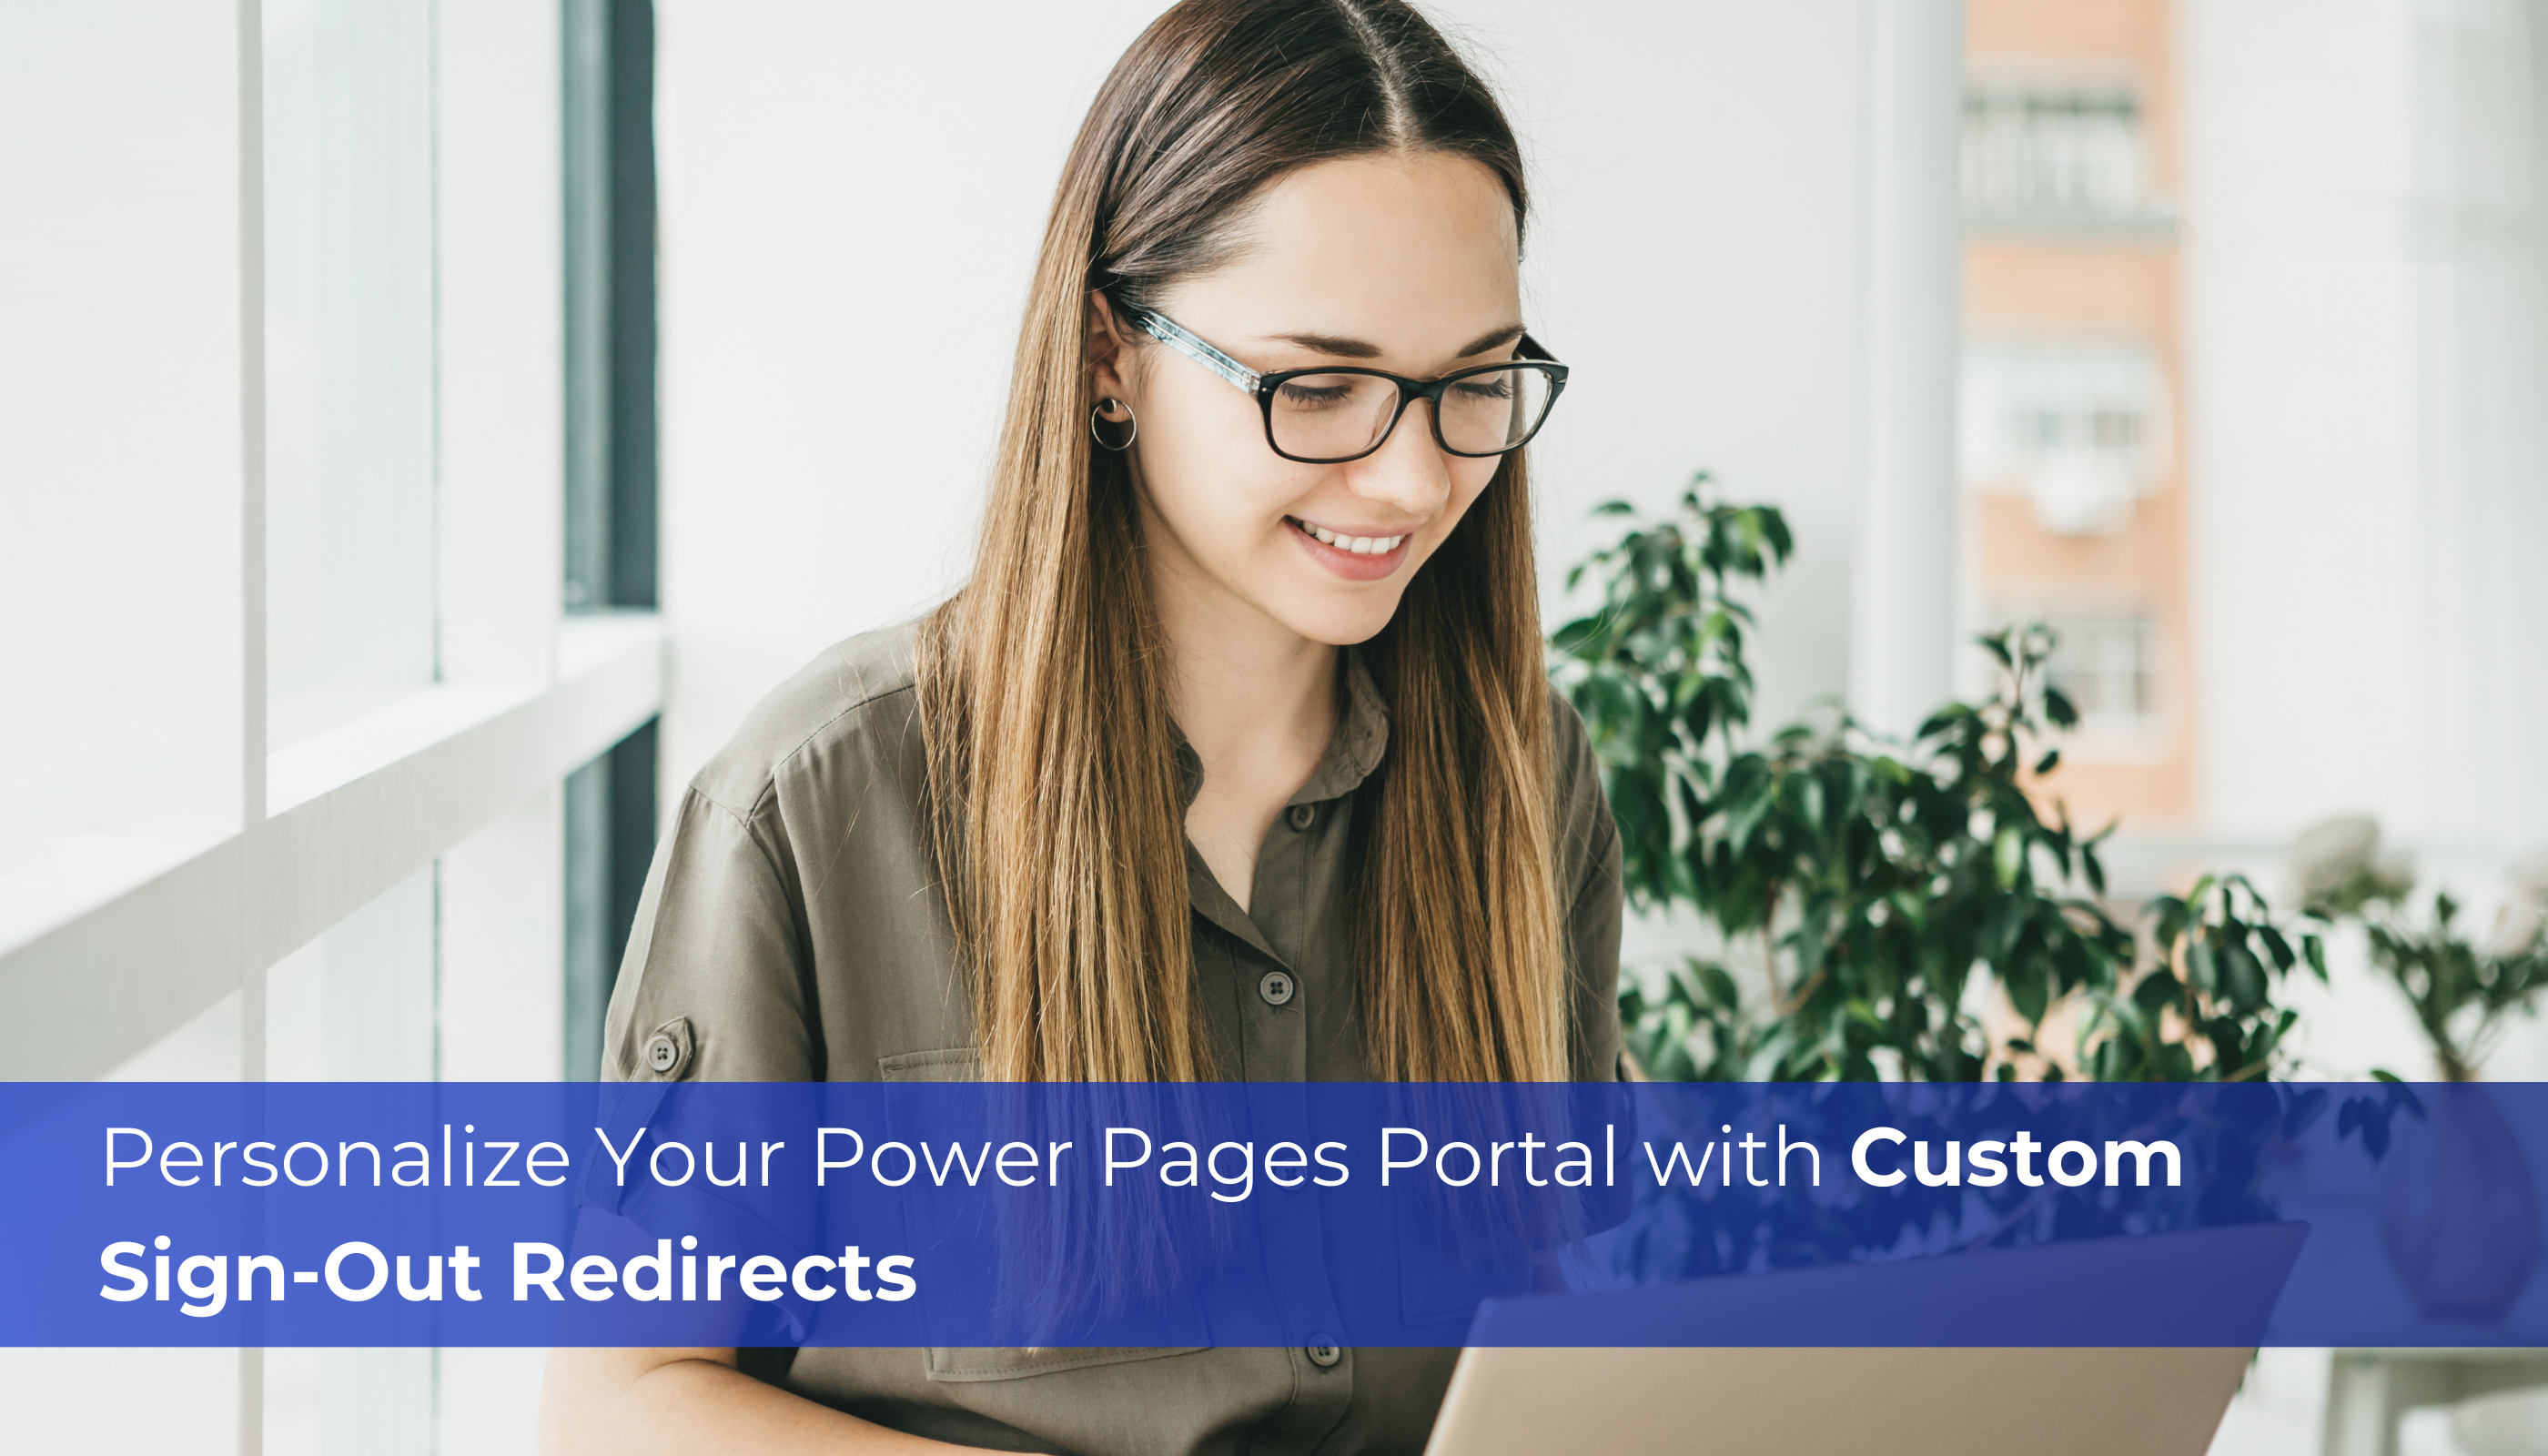 Personalize Your Power Pages Portal with Custom Sign-Out Redirects